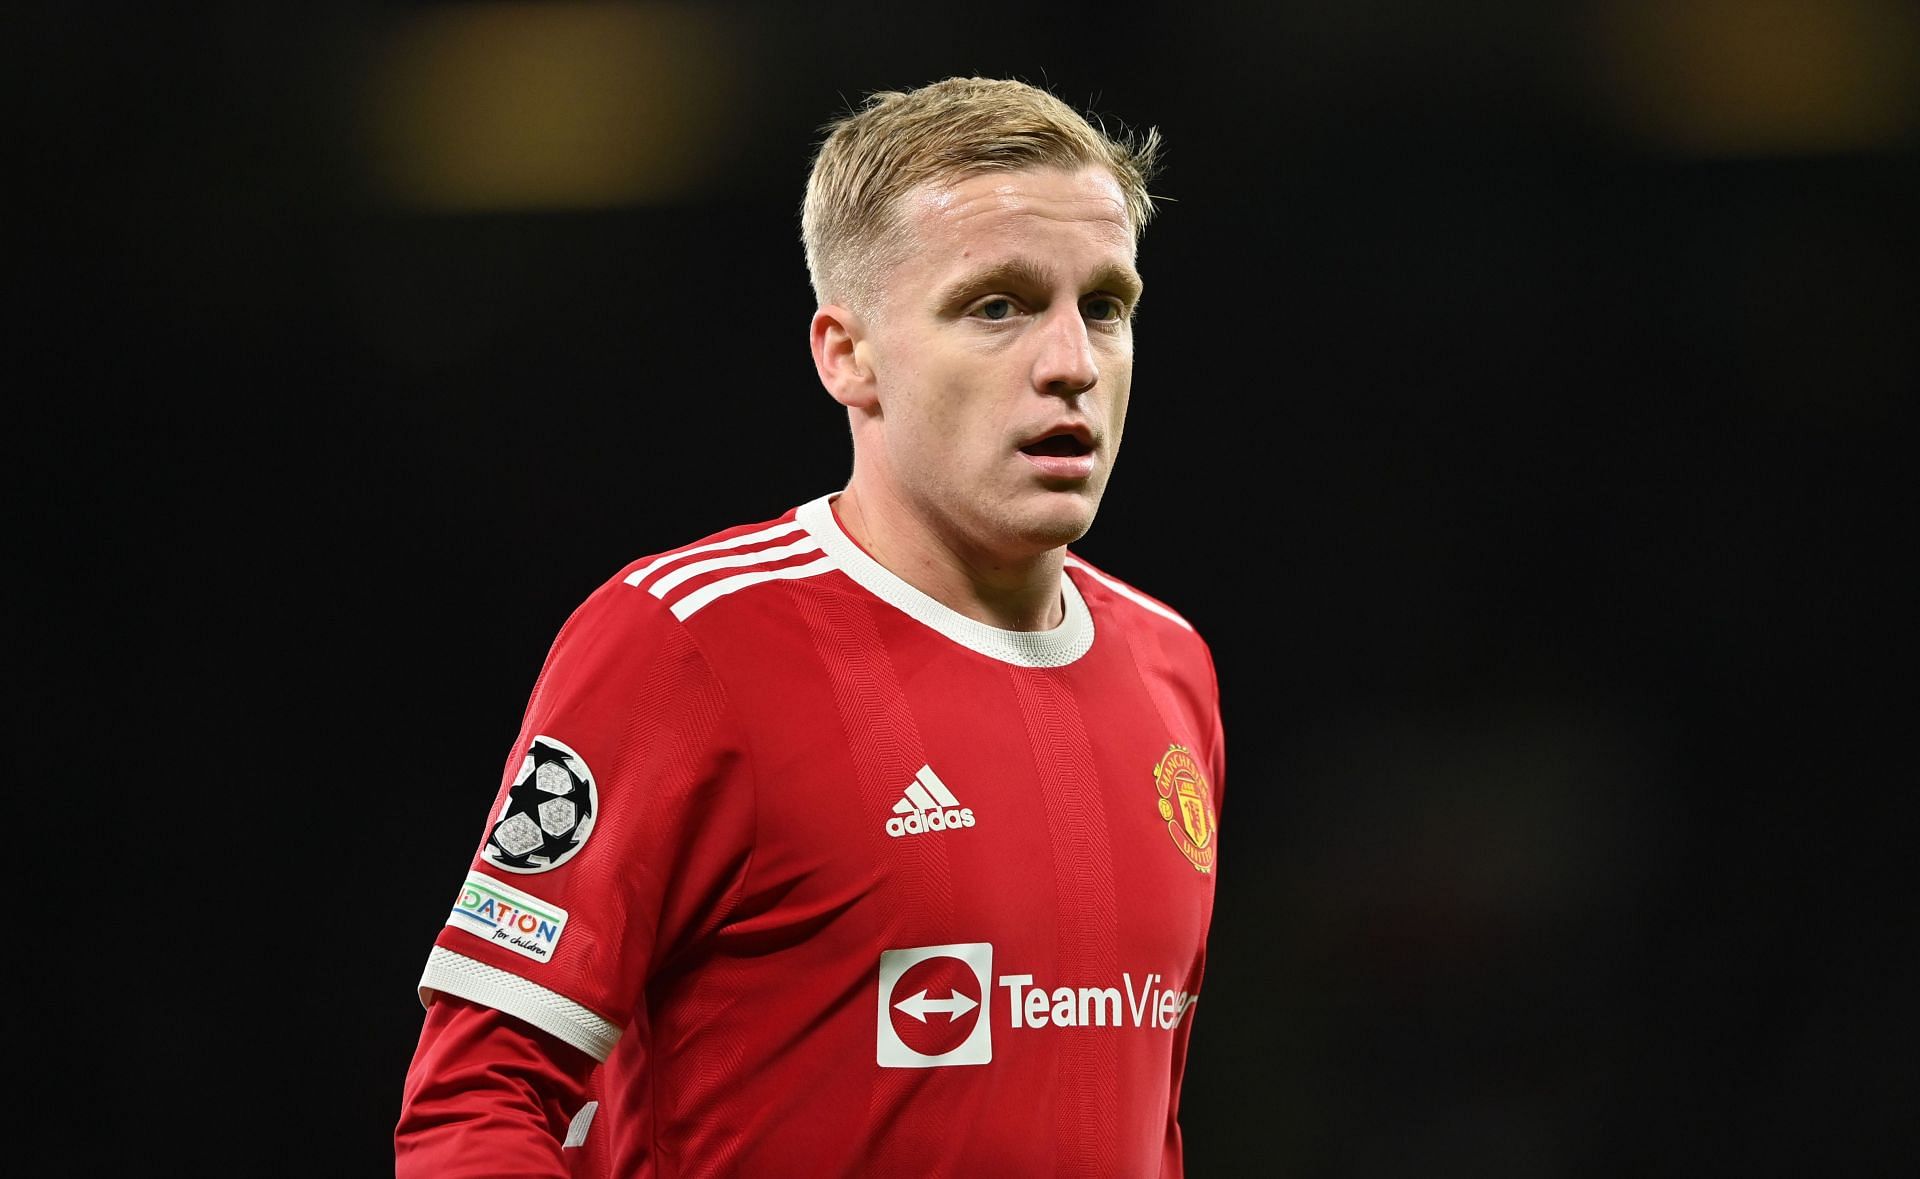 Donny van de Beek has joined Everton on loan for the rest of the season.